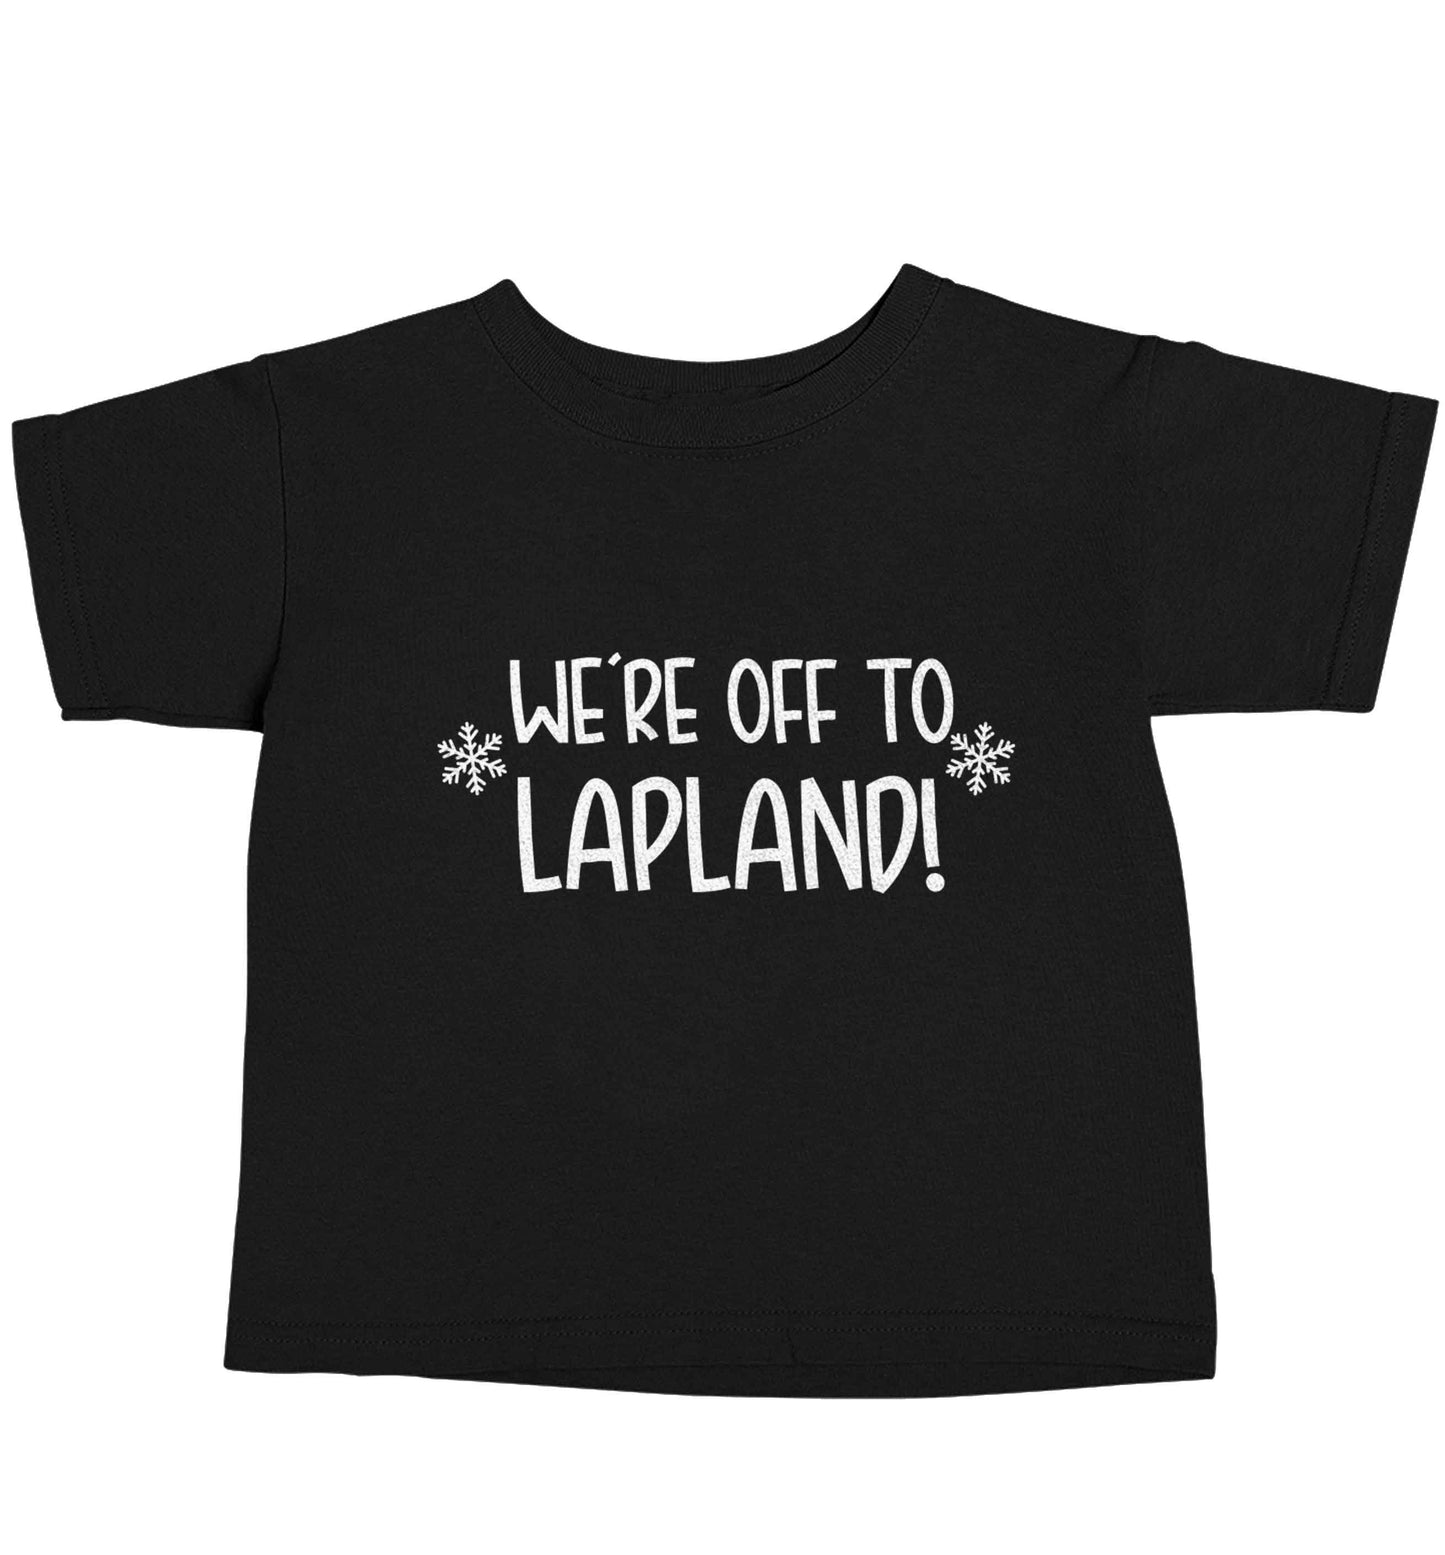 We're off to Lapland Black baby toddler Tshirt 2 years